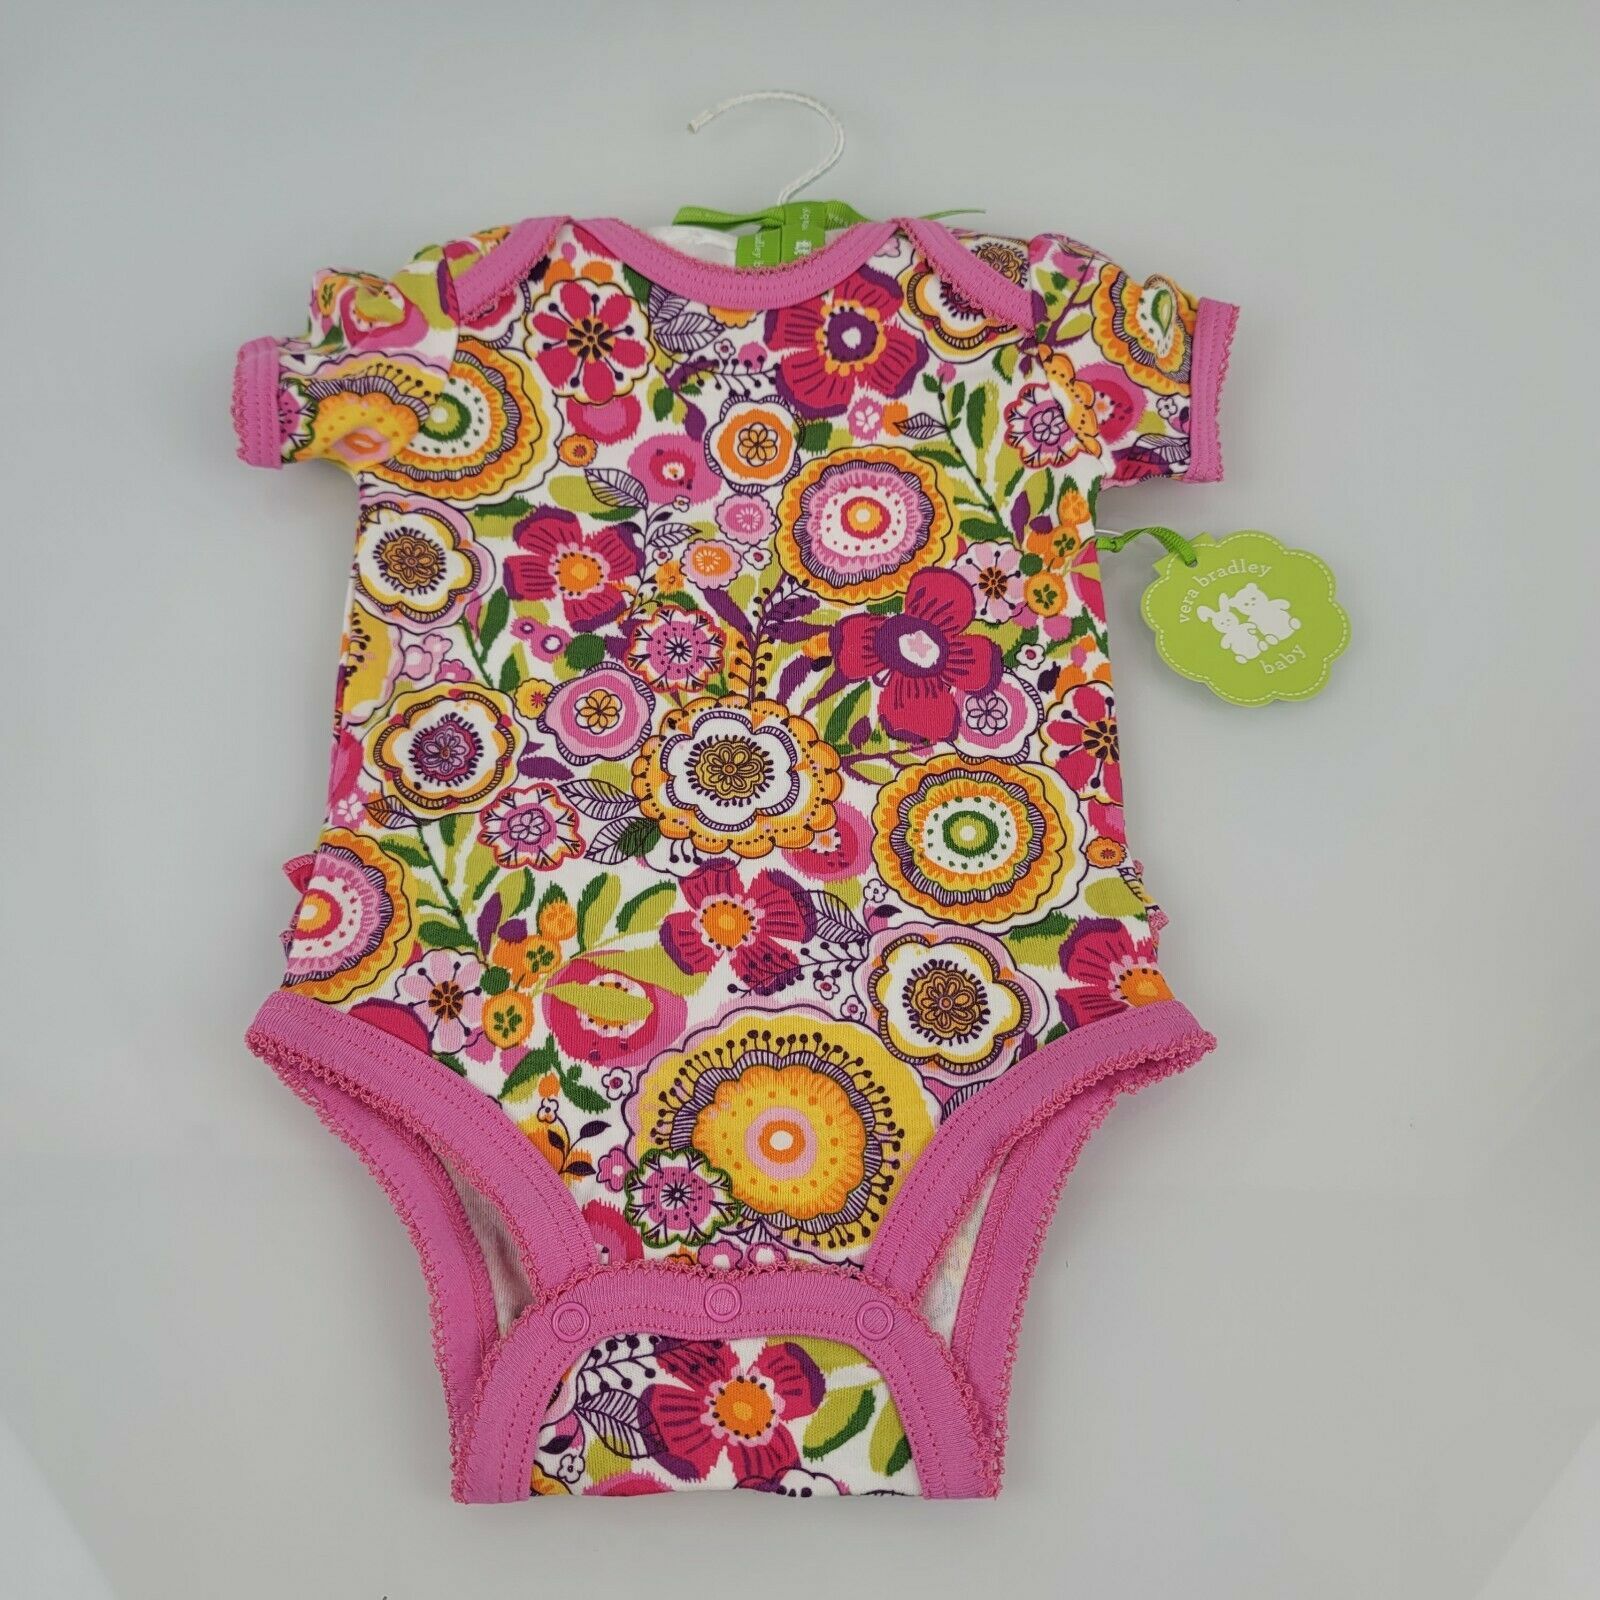 Primary image for NWT Vera Bradley Baby Girl Clothes Clementine Ruffle Bodysuit Size 0-3 months